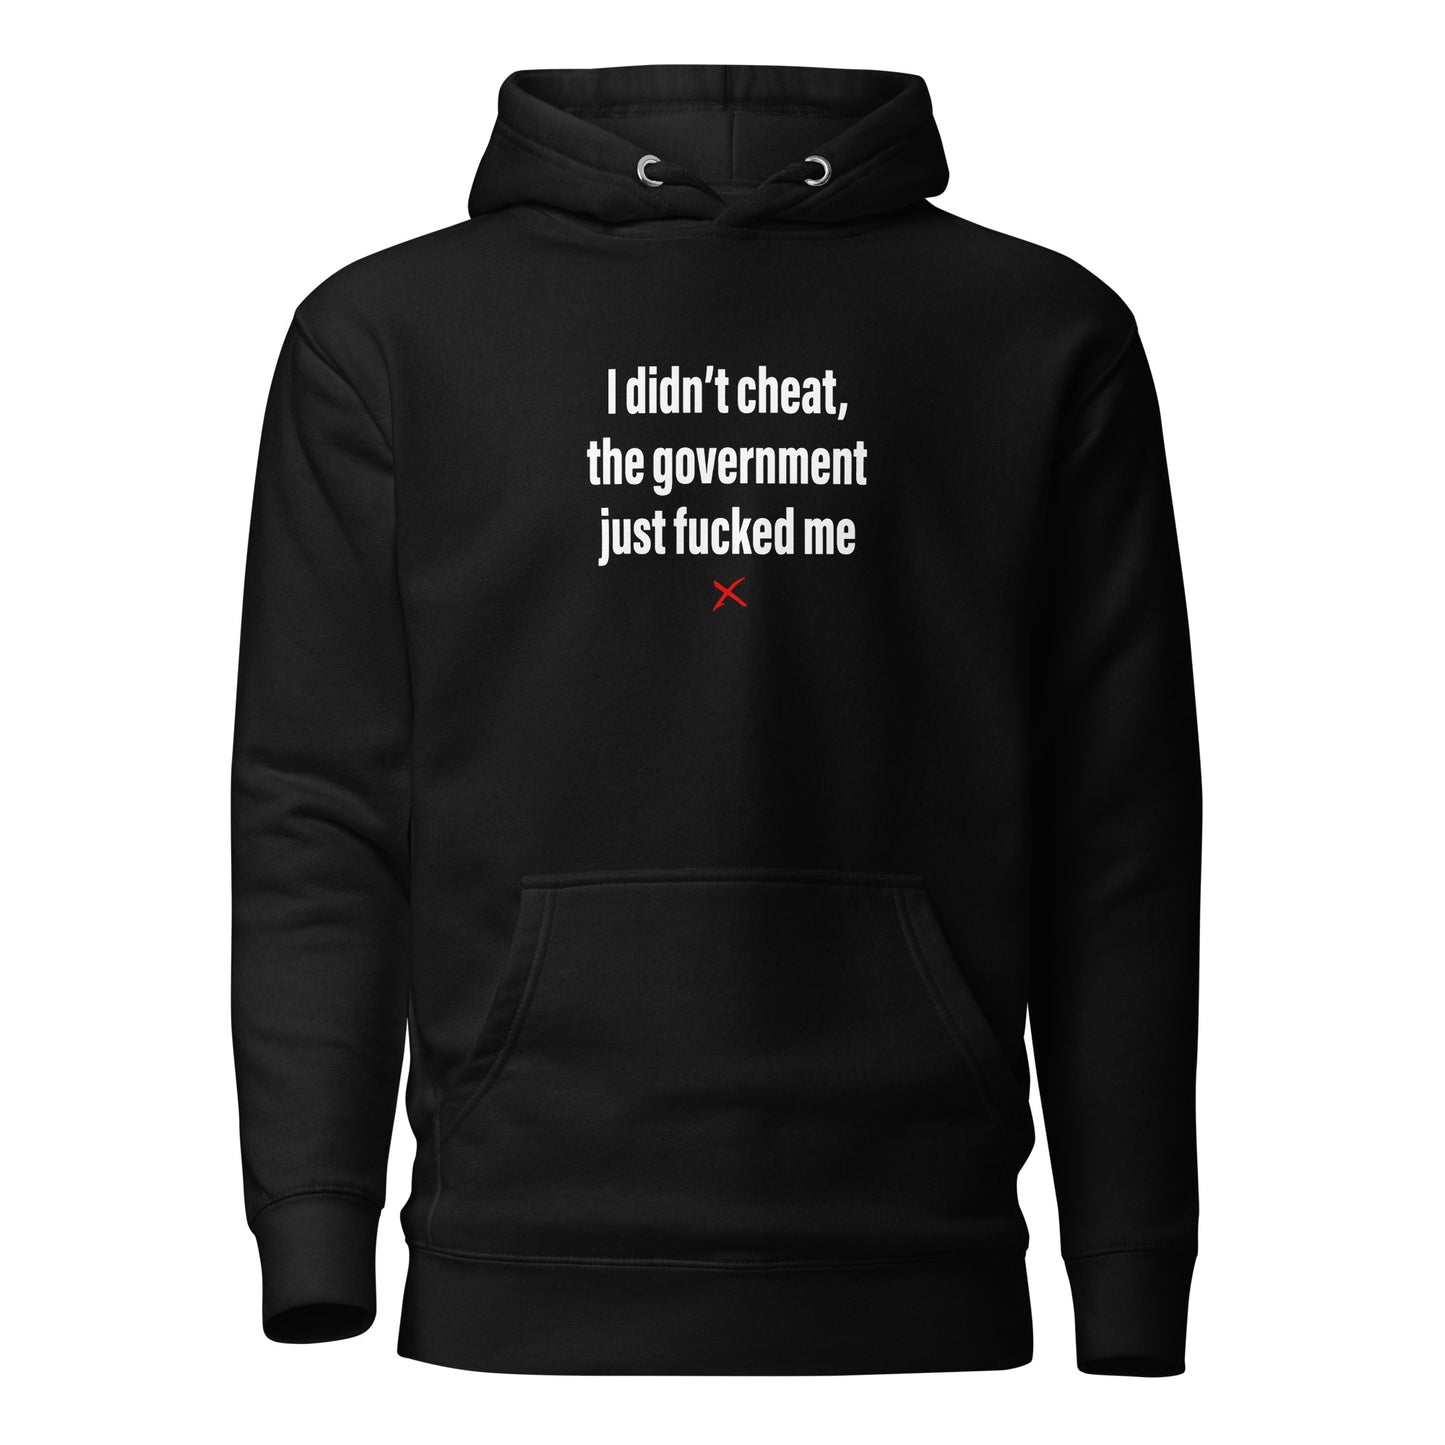 I didn't cheat, the government just fucked me - Hoodie